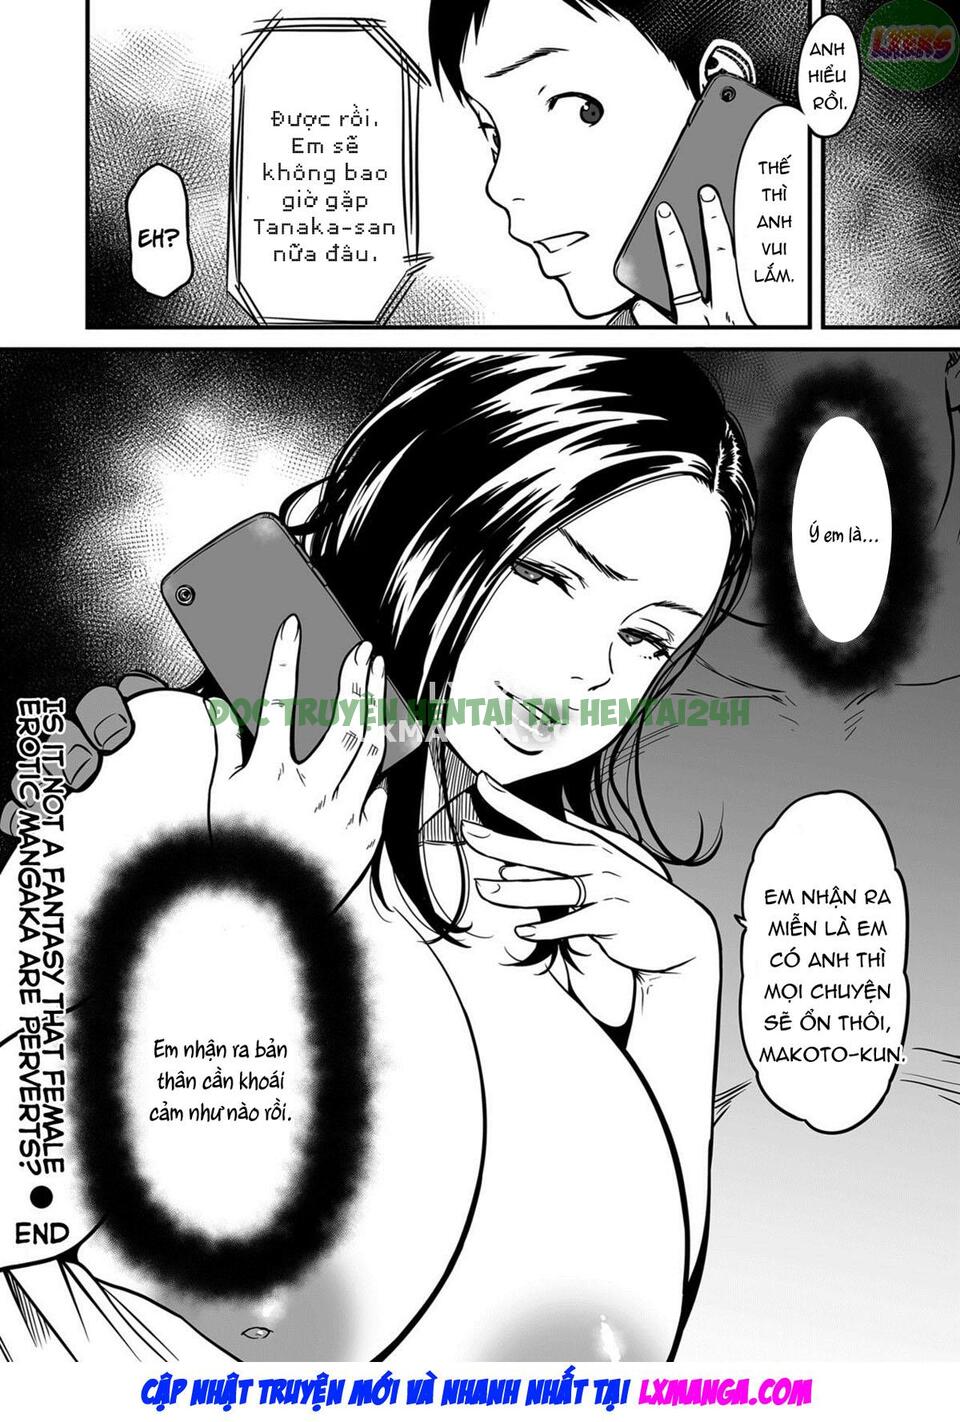 Xem ảnh It’s Not A Fantasy That The Female Erotic Mangaka Is A Pervert - Chapter 7 END - 26 - Hentai24h.Tv